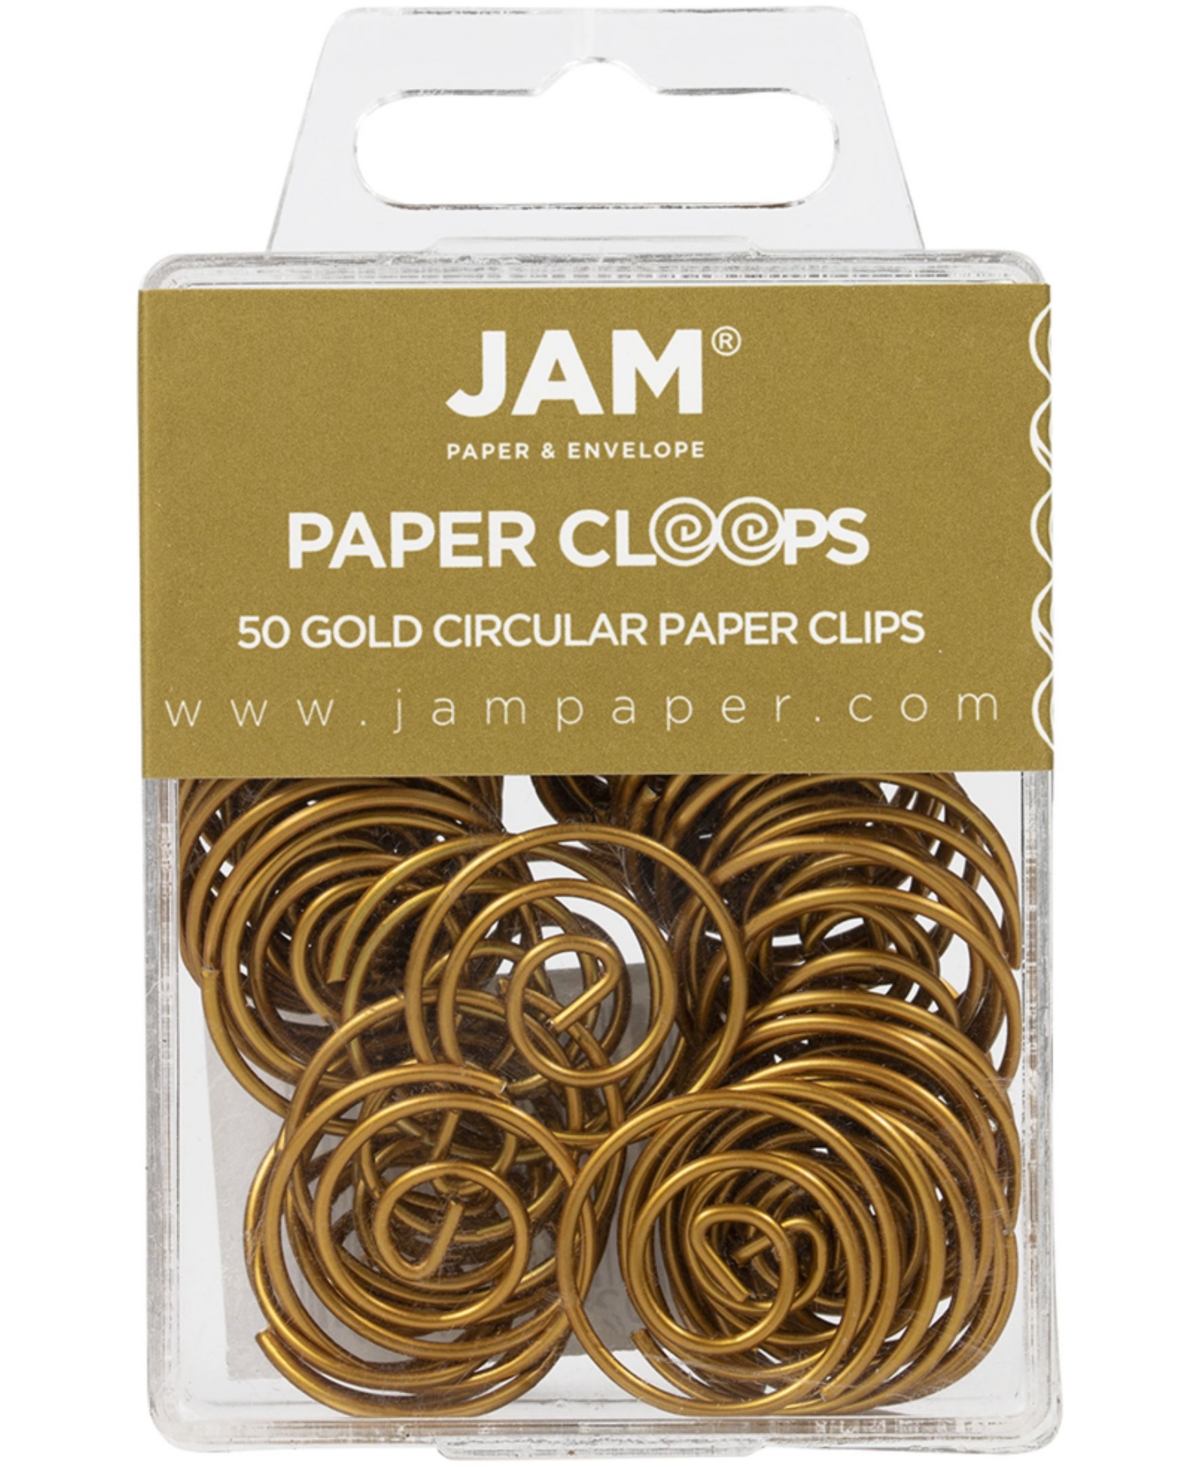 Circular Paper Clips - Round Paperclips - 50 Per Pack - Gold